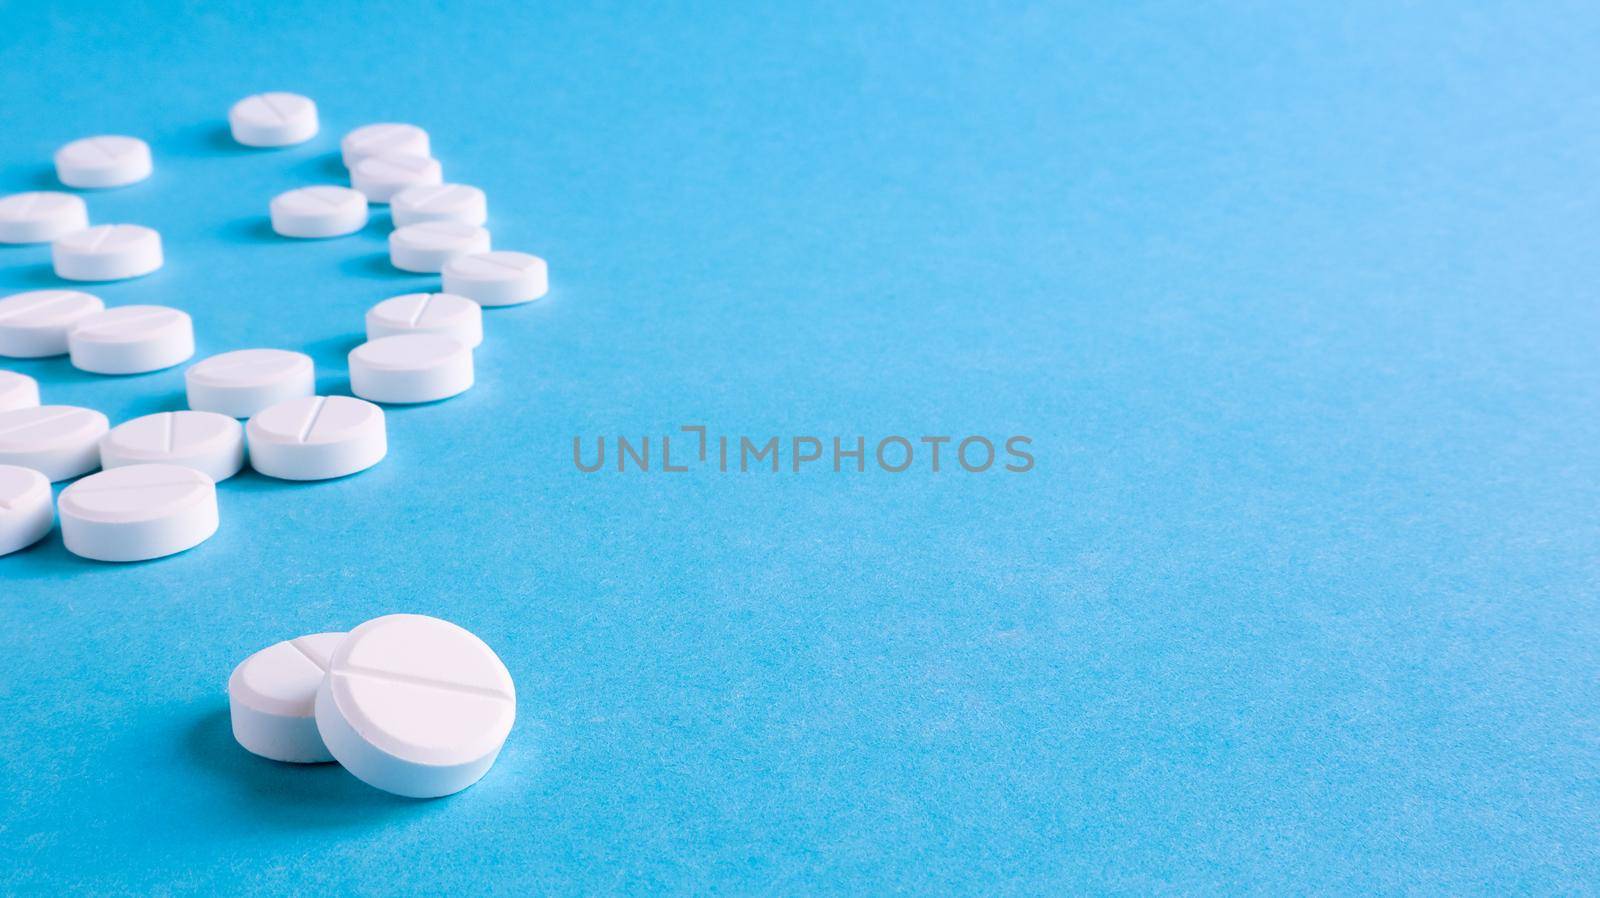 White round medical pills on a blue background. Scattered white pills on the table. The concept of medicine, pharmacy and healthcare. Copy space Empty space for text or logo